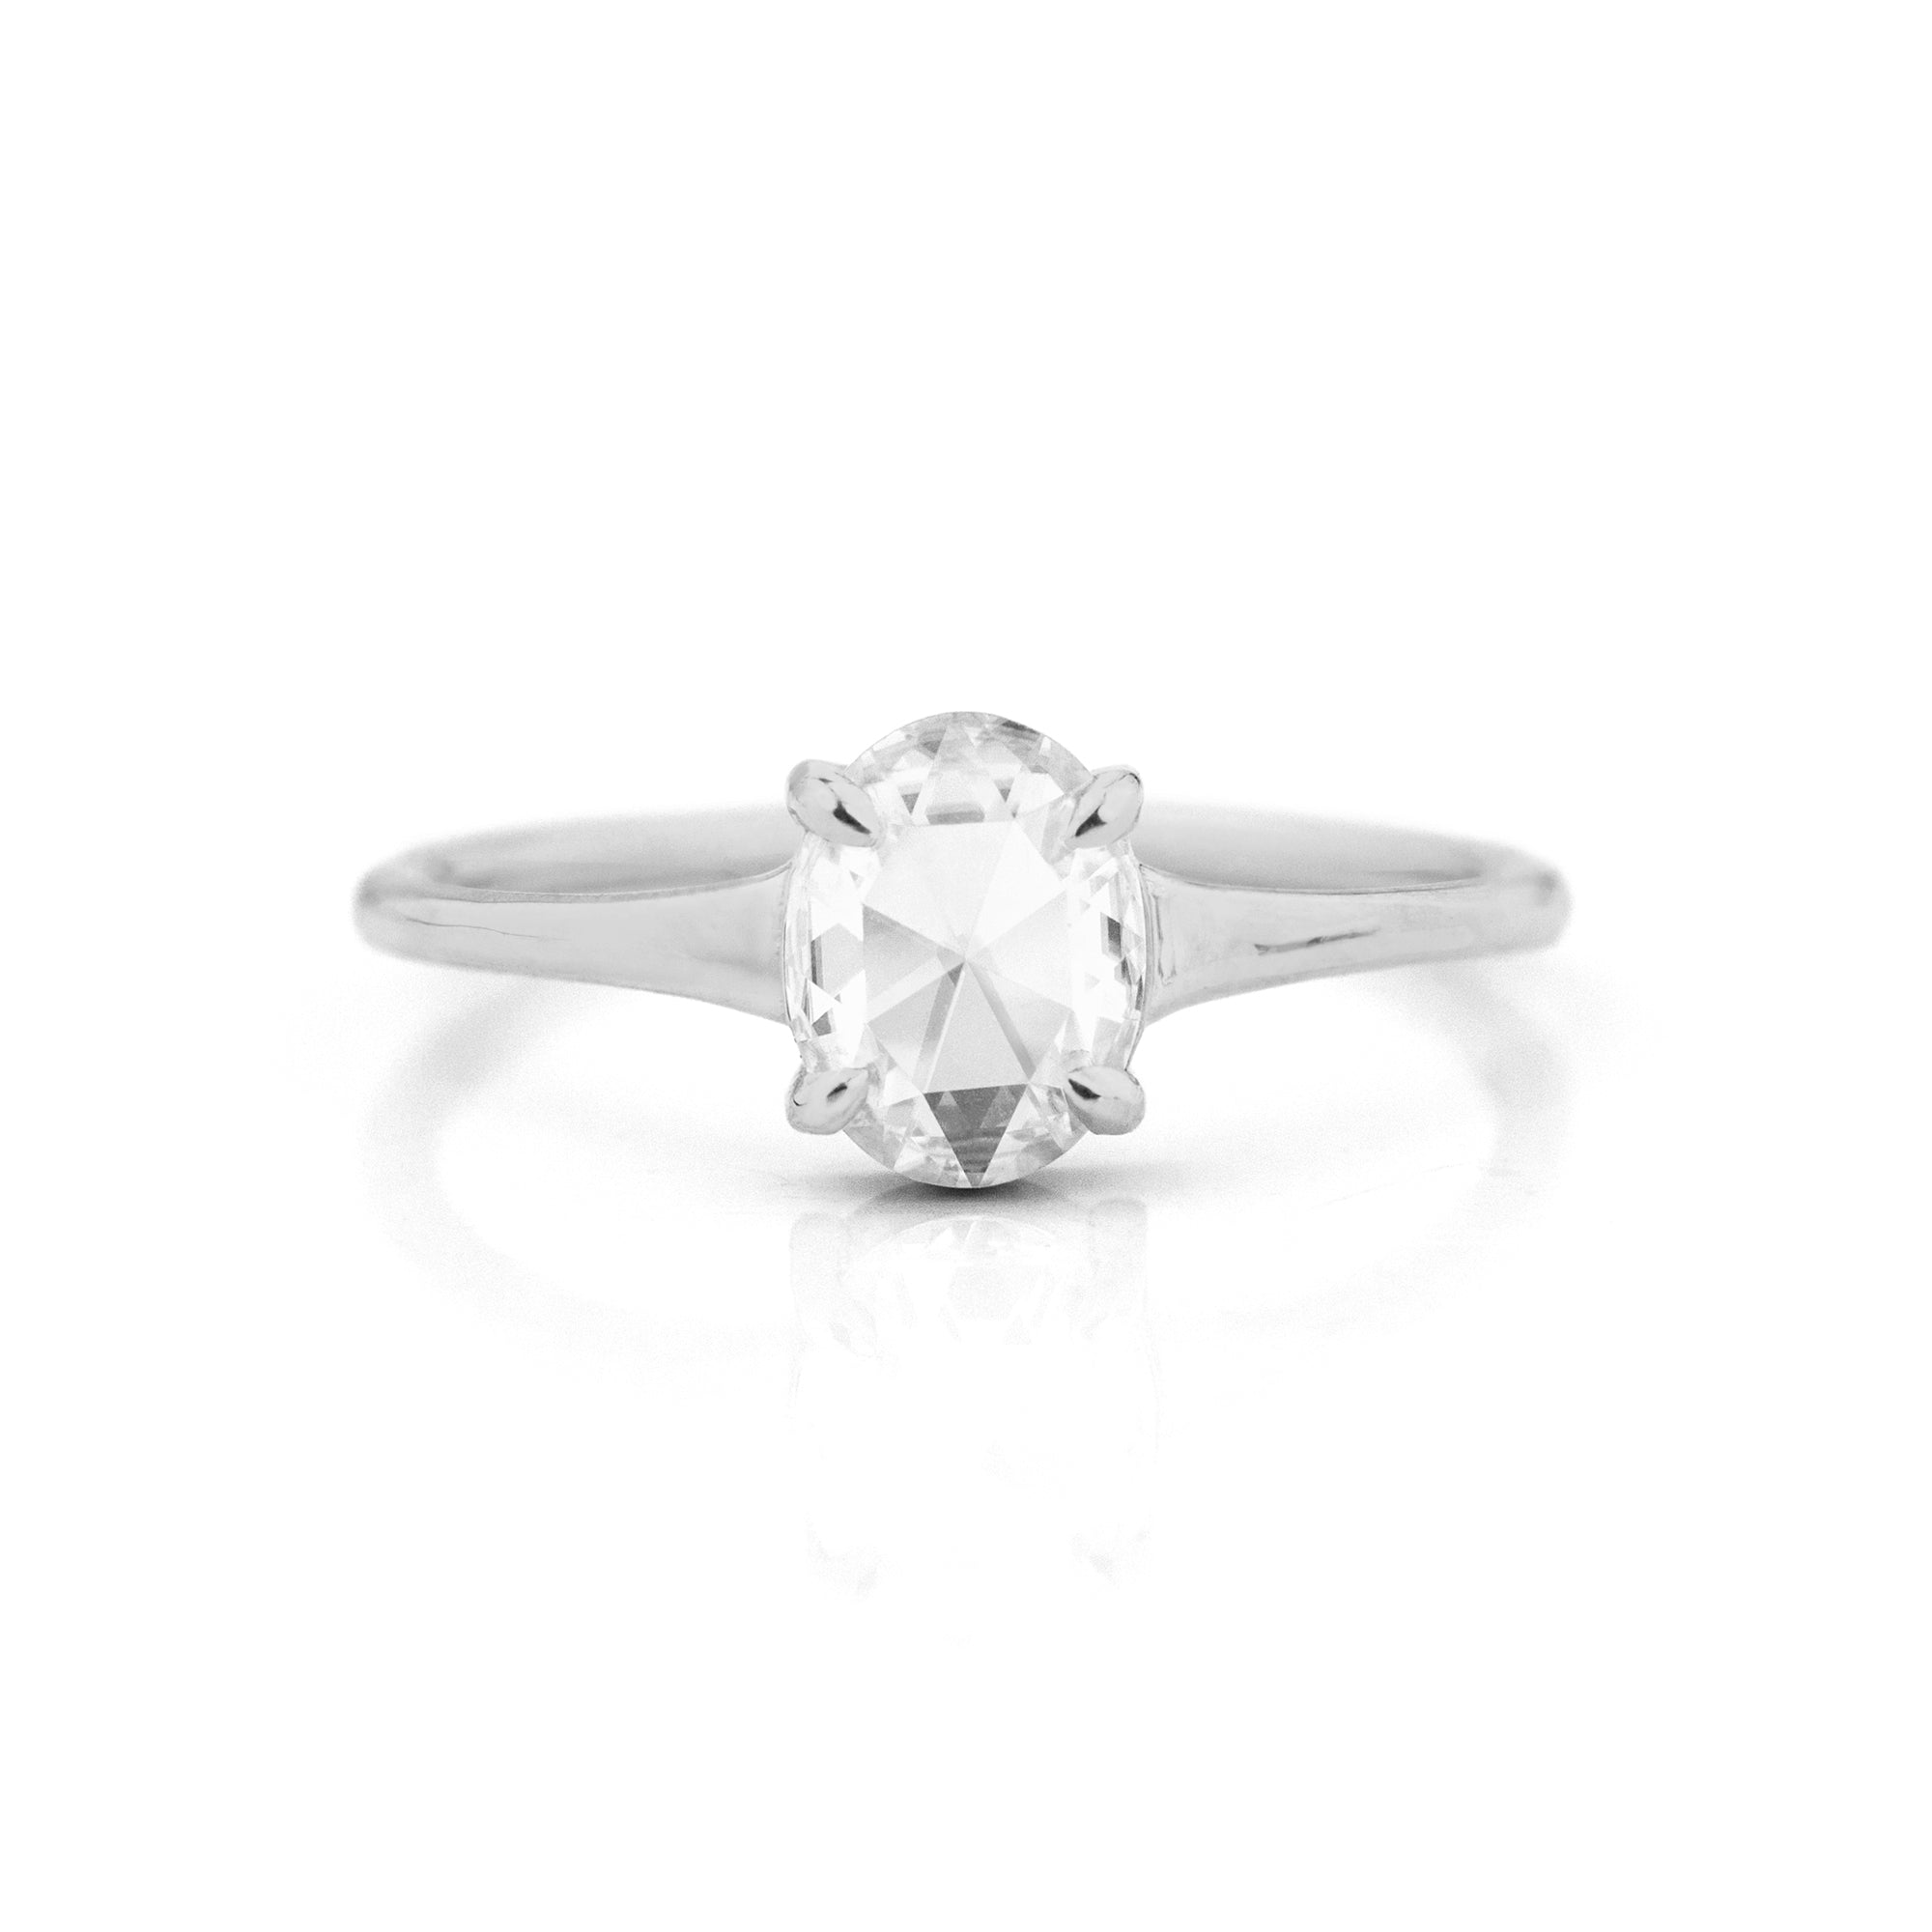 Jamie Park Jewelry | Haven Oval Rose Cut Moissanite Ring https://jamieparkjewelry.com/products/haven-moissanite-ring If you have had your heart set on a unique yet minimal design, the Haven Oval Rose Cut Moissanite Ring is the perfect choice. The larger facets create more dramatic brilliance, while the vintage-inspired rose cut adds a romantic and unique touch to this ring. The low-profile setting makes it ideal for everyday wea